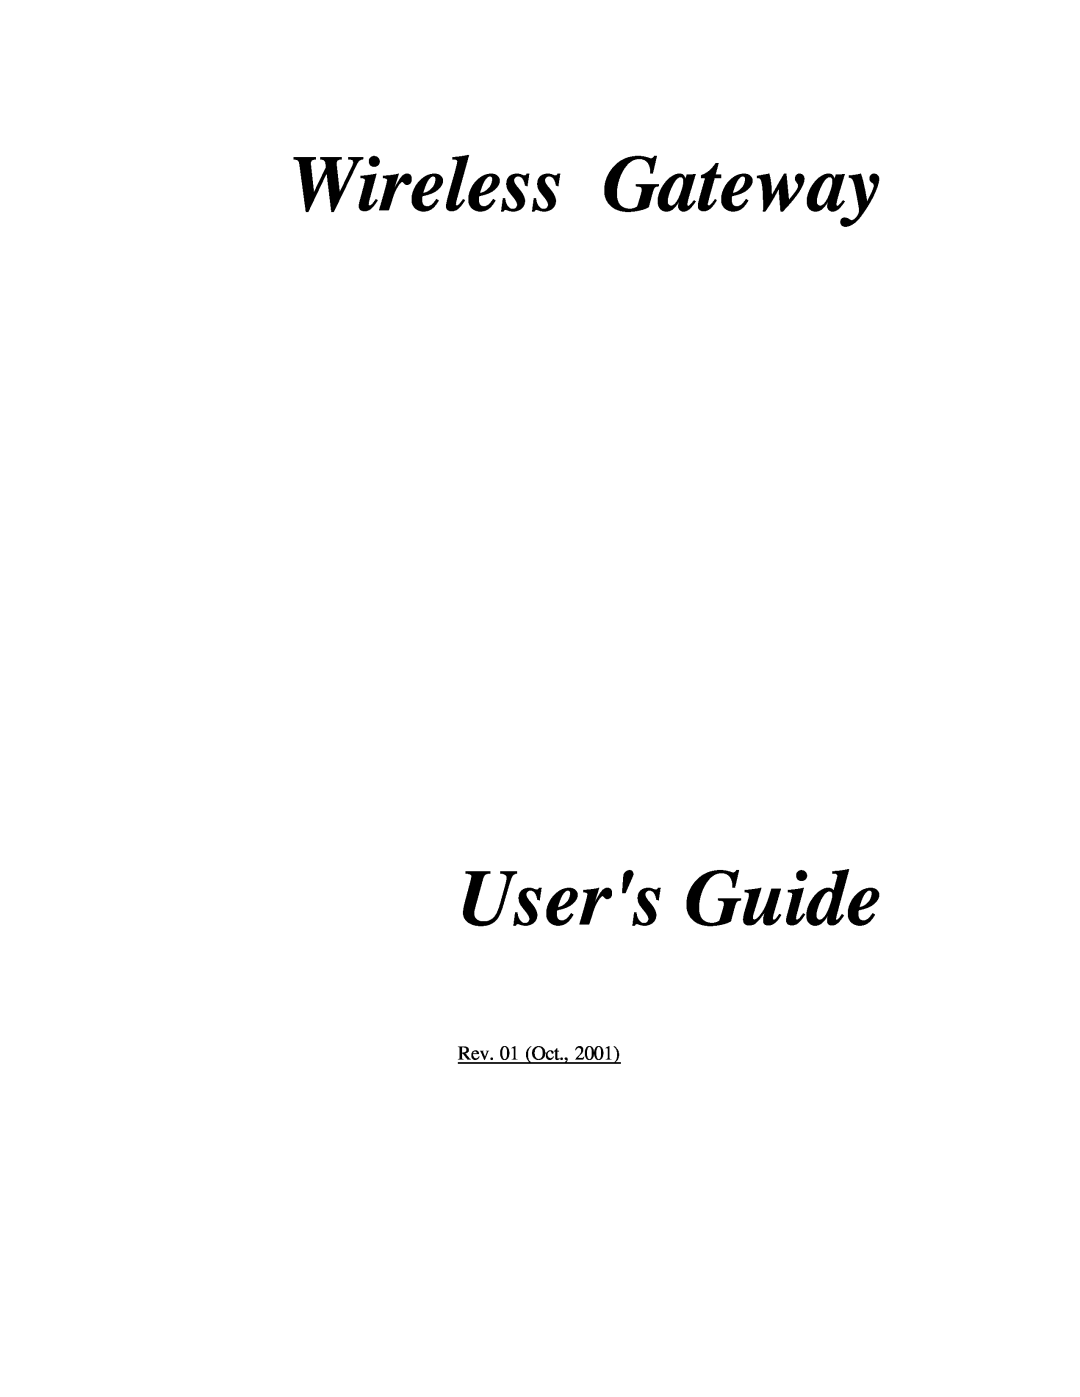 Nlynx Wireless Gateway manual Users Guide, Rev. 01 Oct 